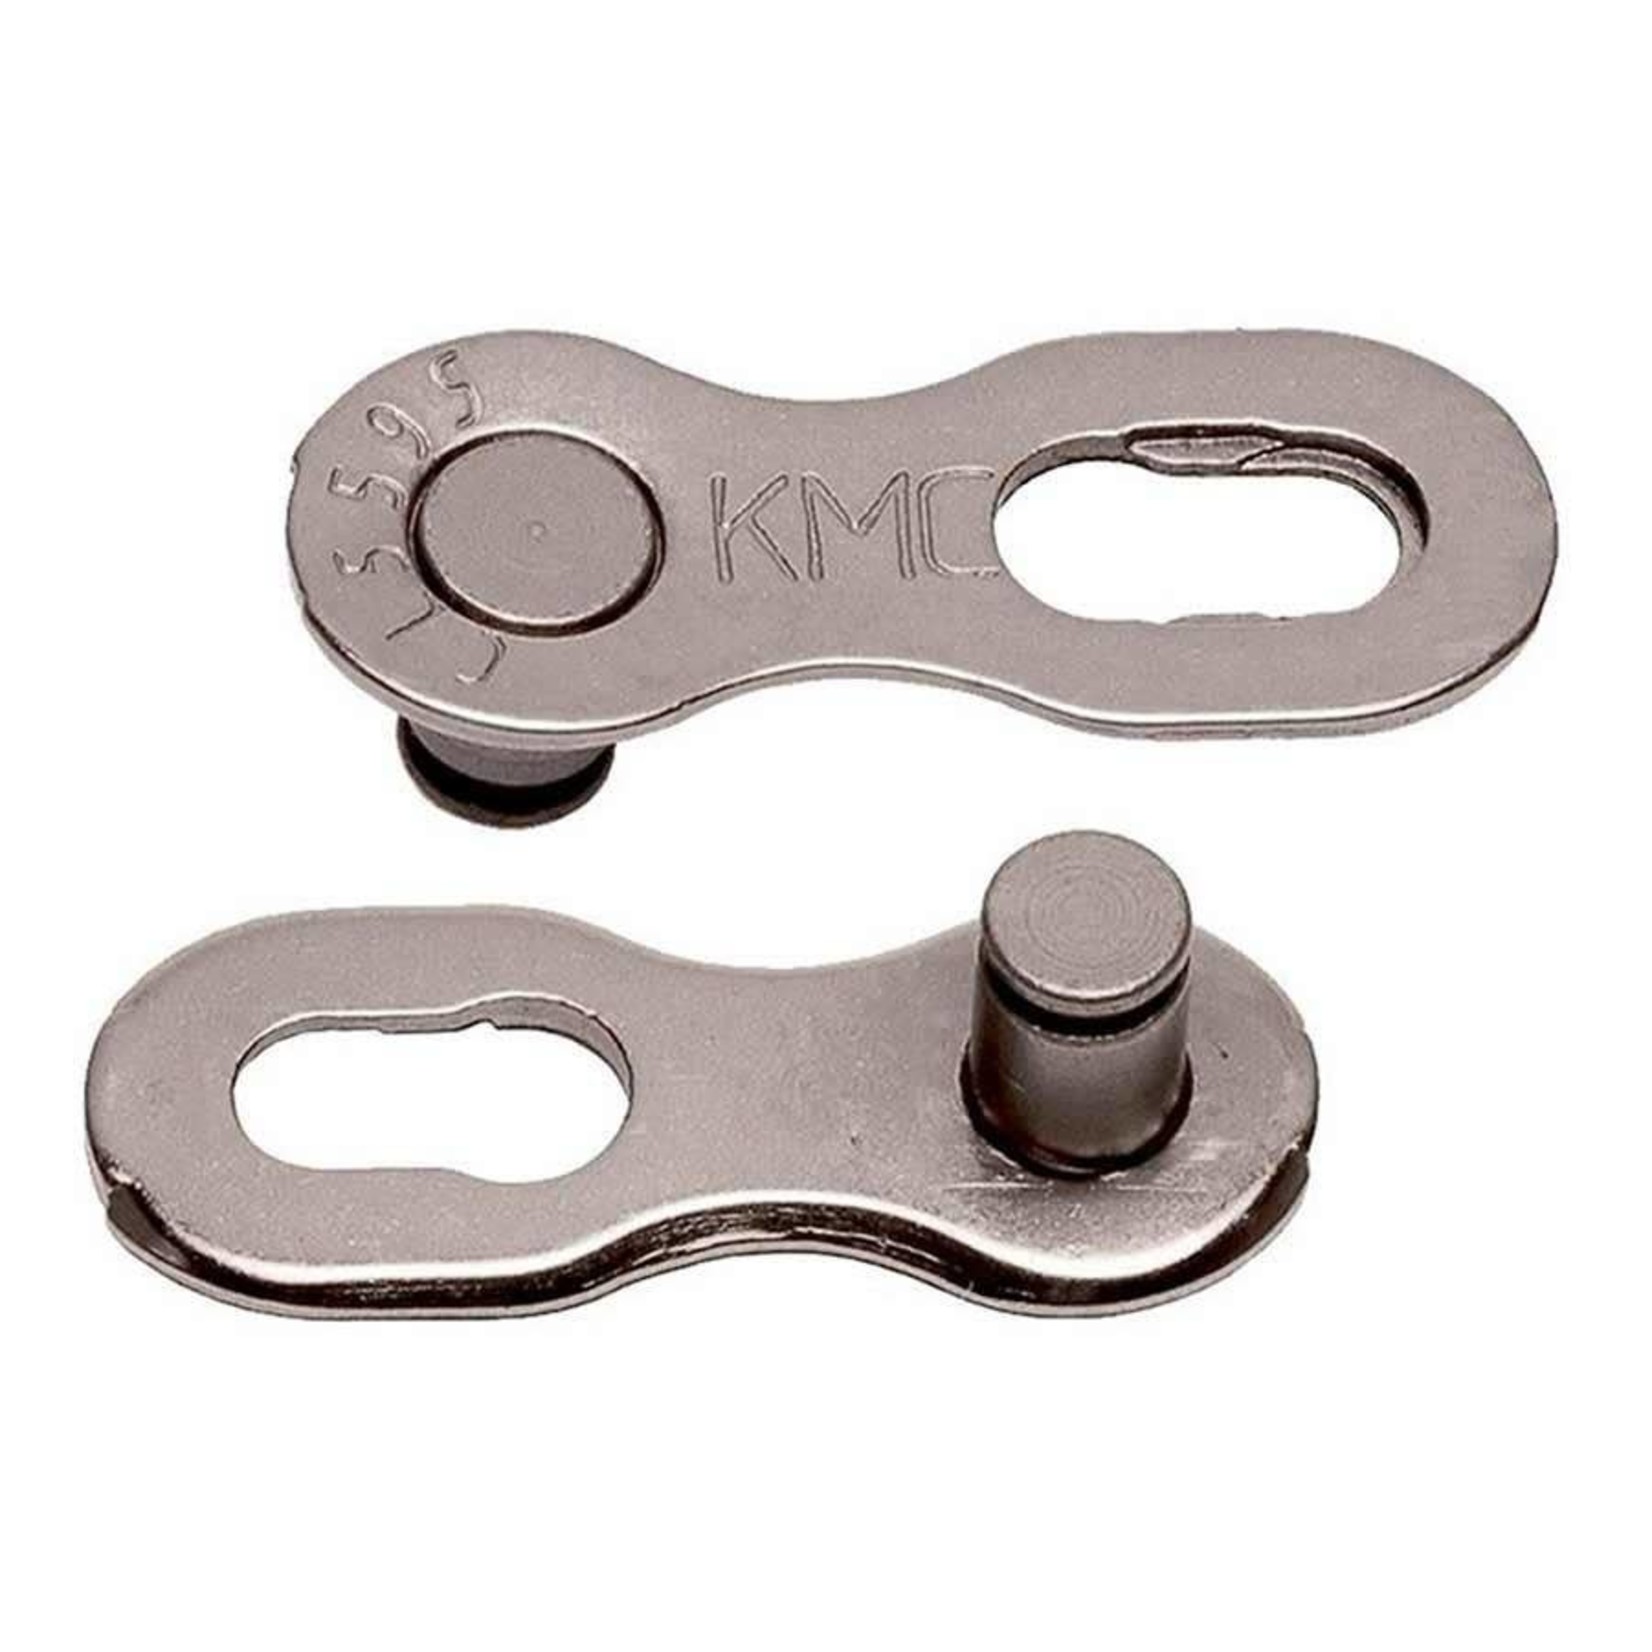 KMC, Connecting Links, HG 7/8sp, 7.3mm pin width, single